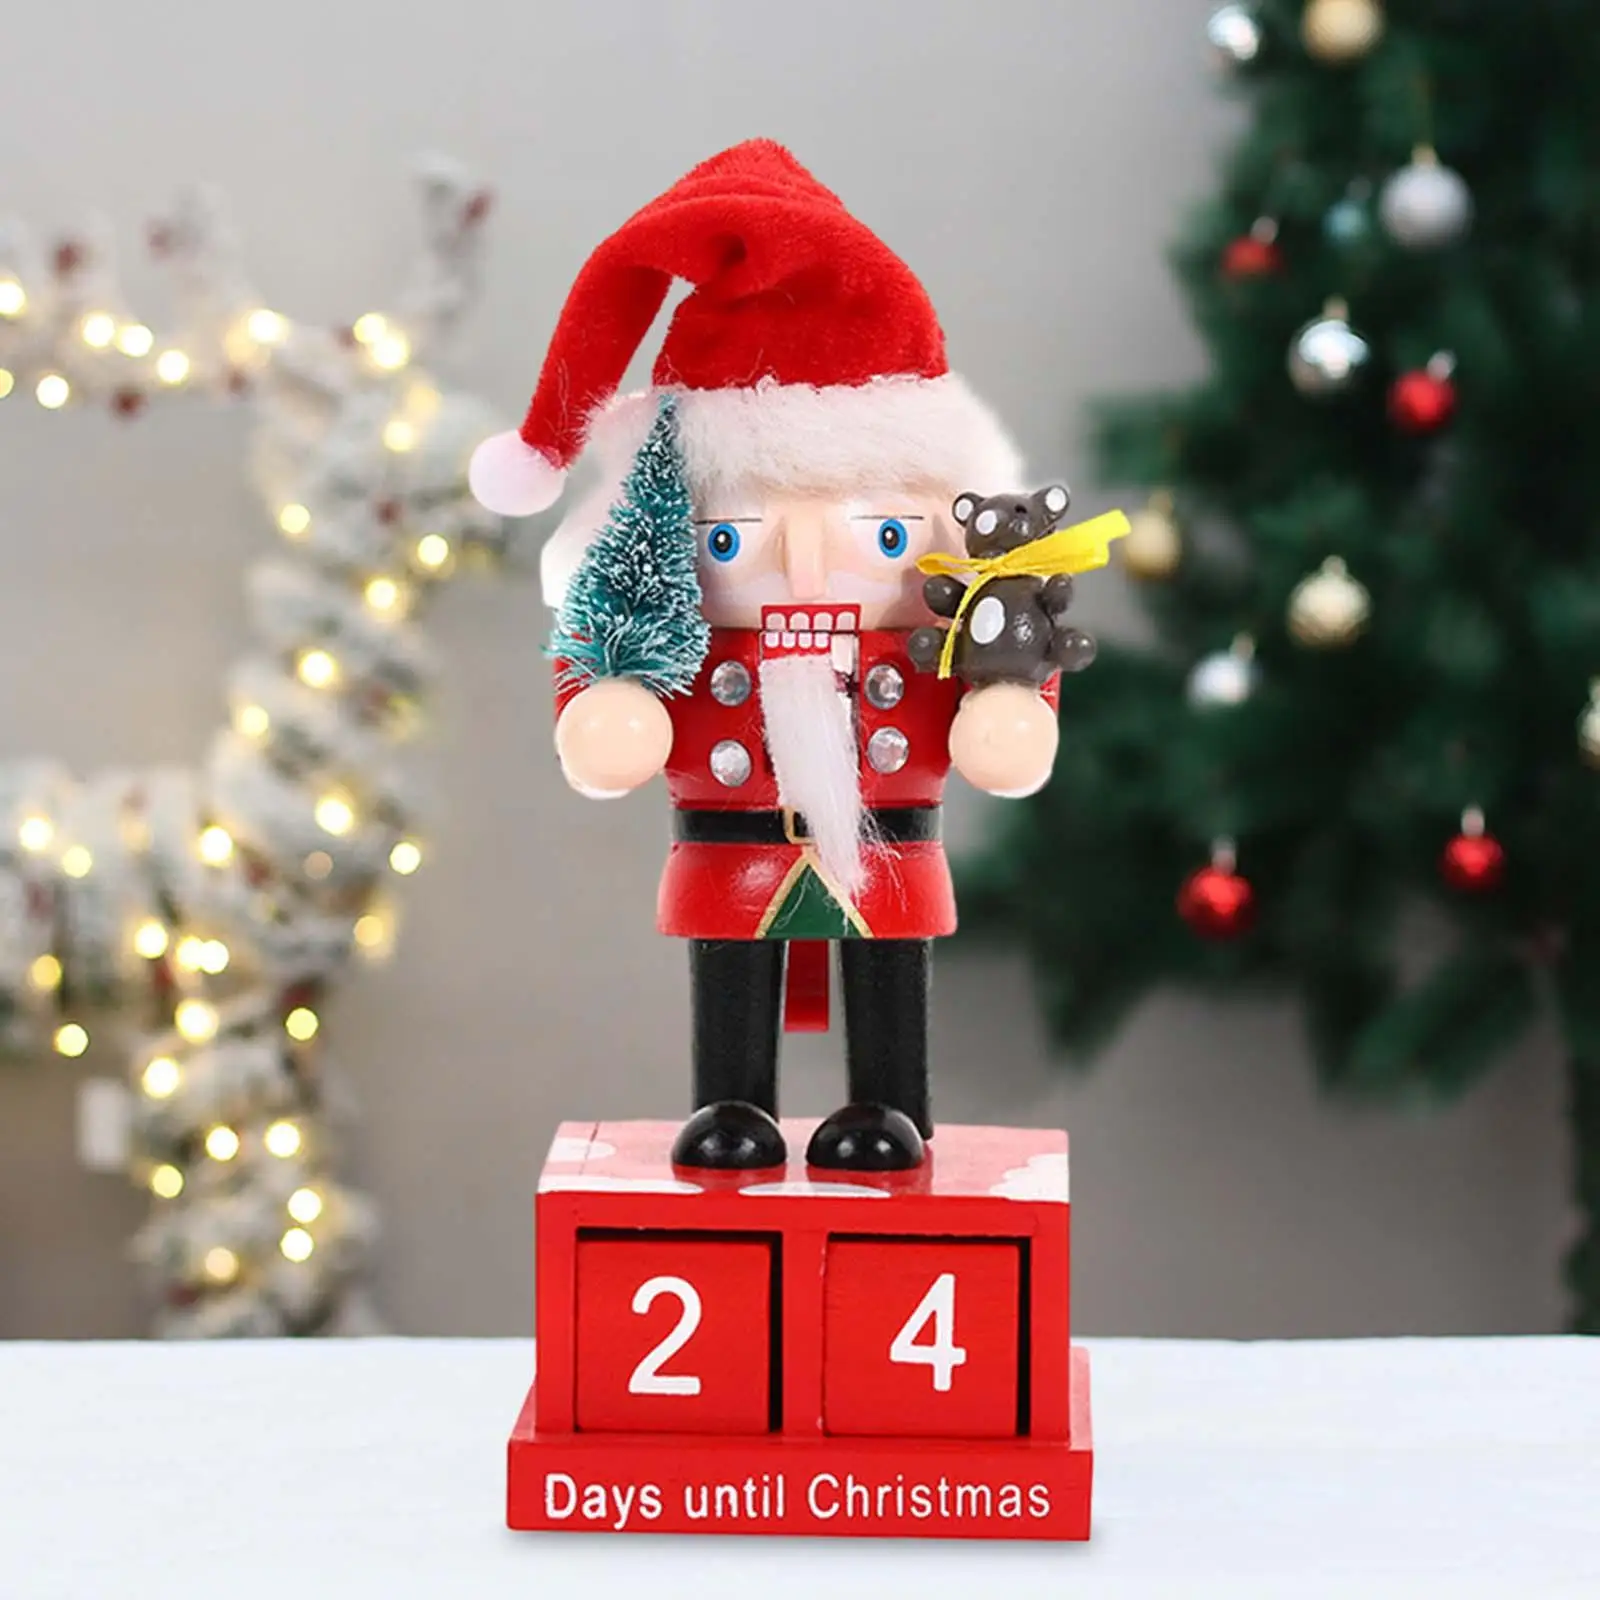 Xmas Calendar Xmas Gifts Santa Claus Perpetual Tabletop Decoration Square Number Calendar for Counter Christmas New Year